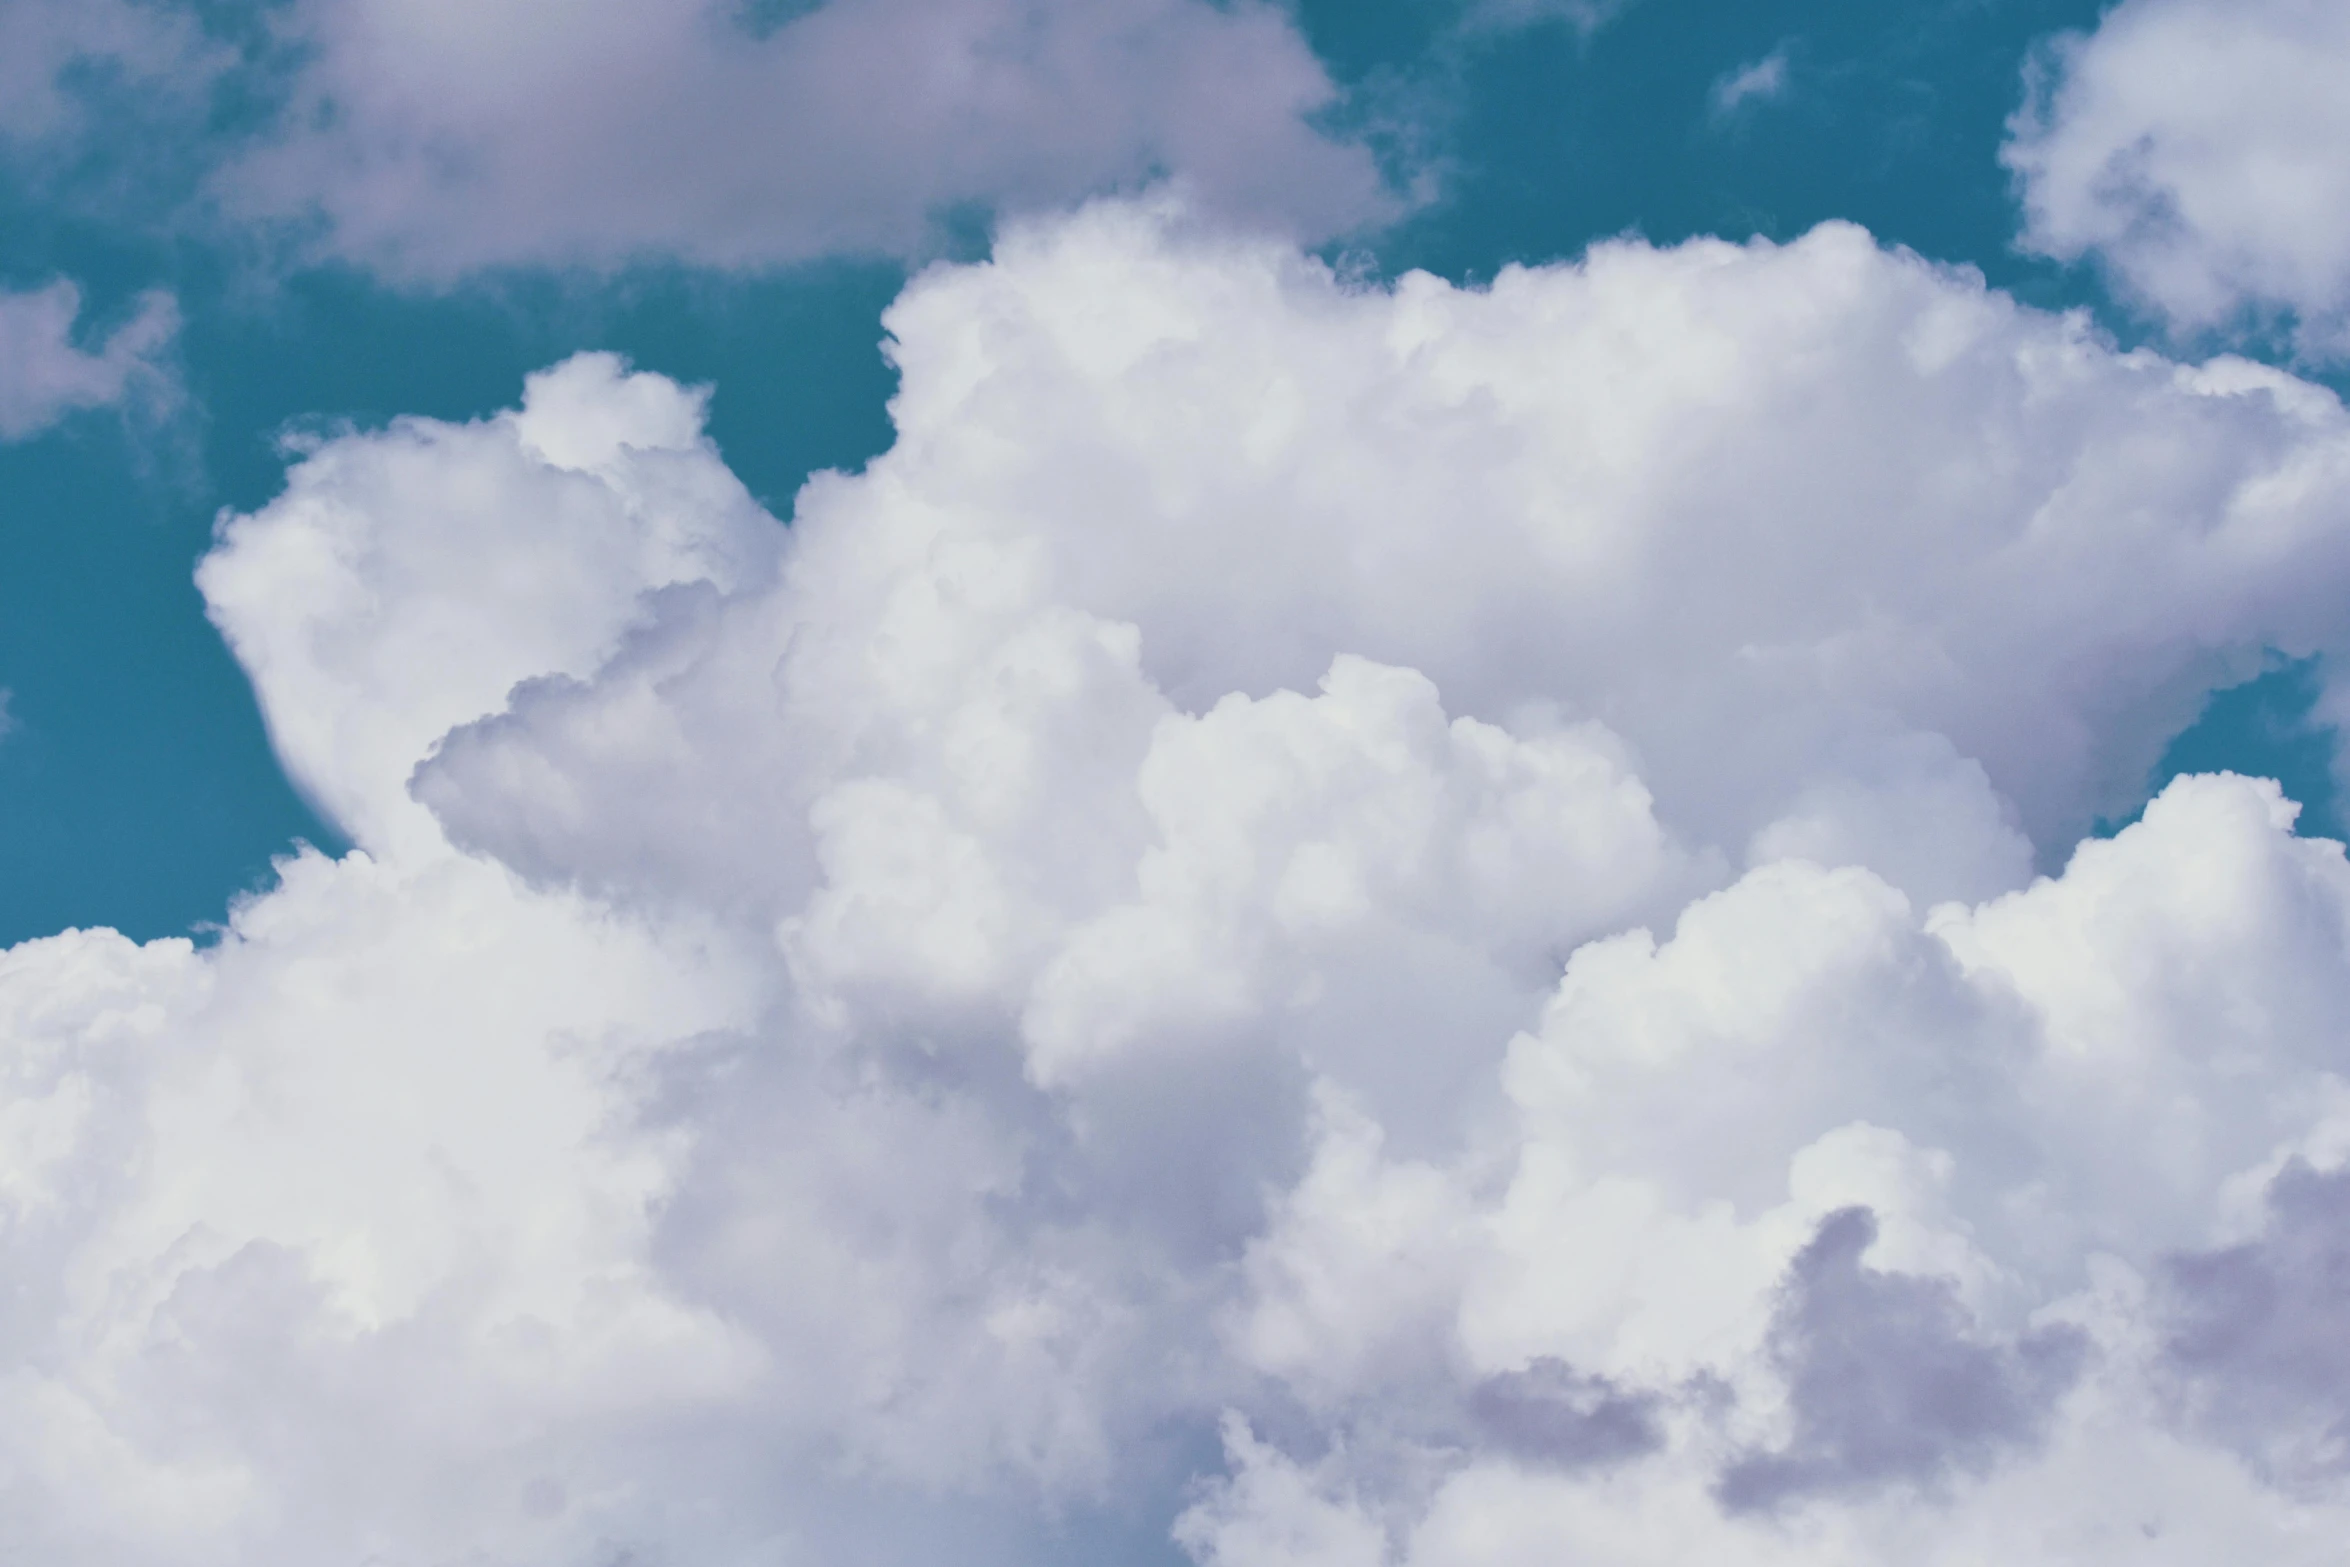 a plane flying through a cloudy blue sky, an album cover, unsplash, magic realism, cumulus, profile image, close-up photo, multiple stories